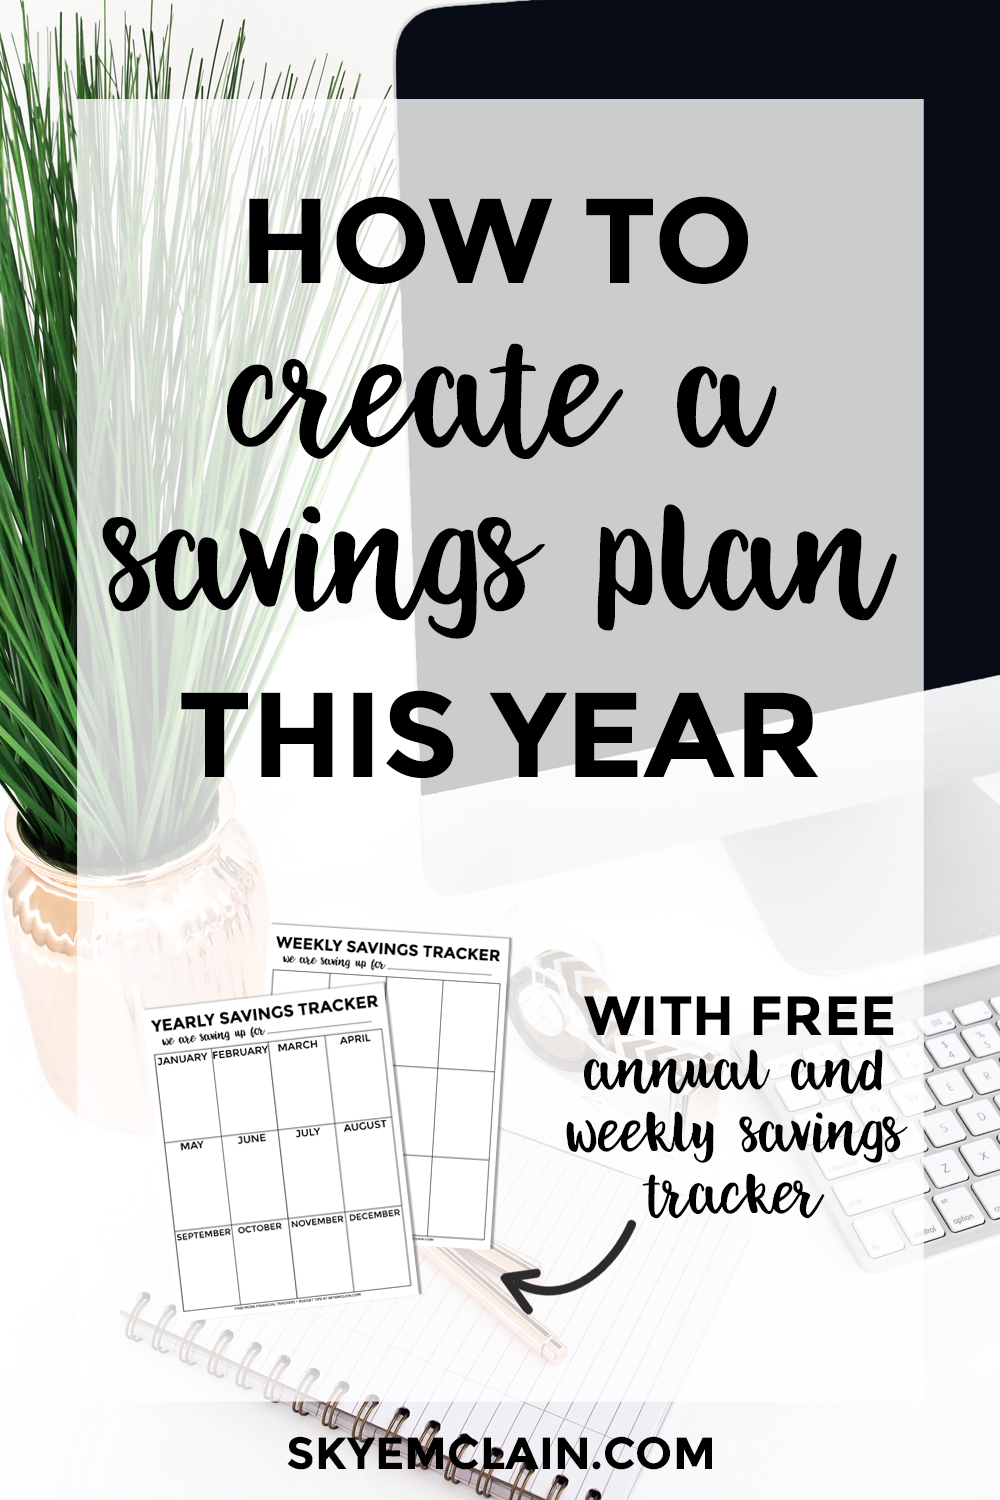 How to Create a Money Saving Plan this Year with Annual and Weekly Savings Trackers - download your free trackers at skyemclain.com